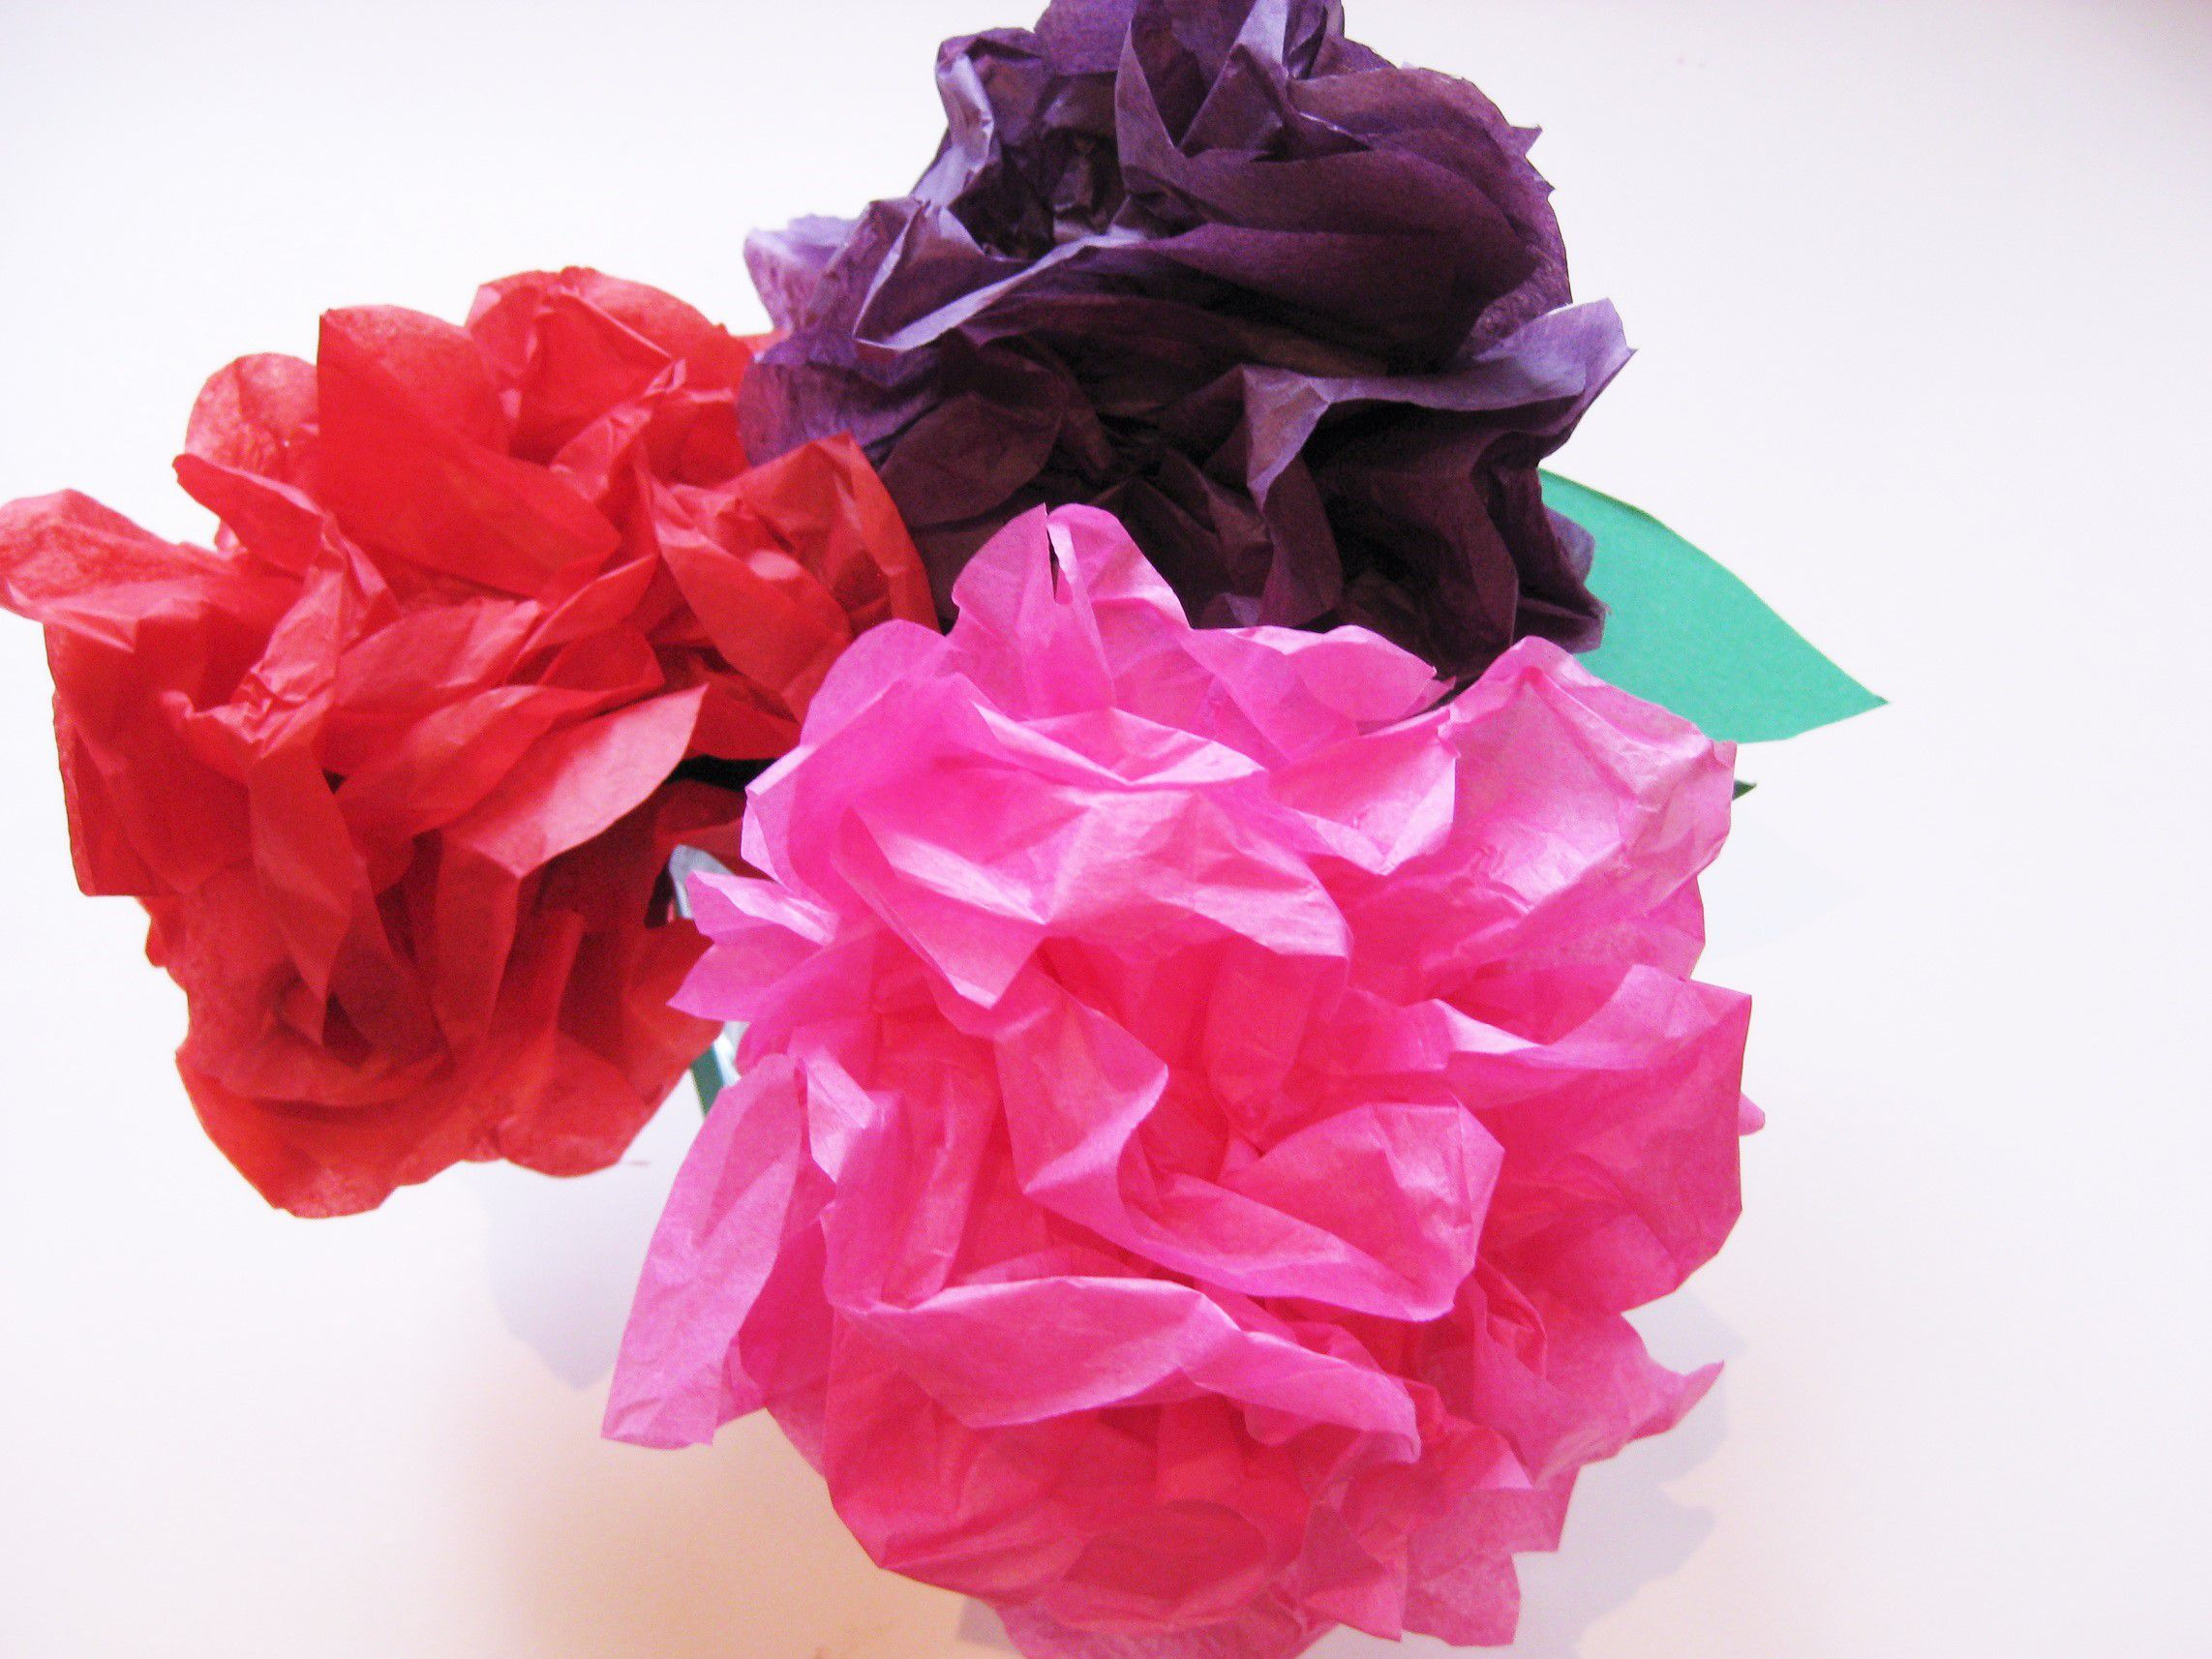 How To Make An Origami Rose Out Of Money Simple Steps To Craft Tissue Paper Flowers